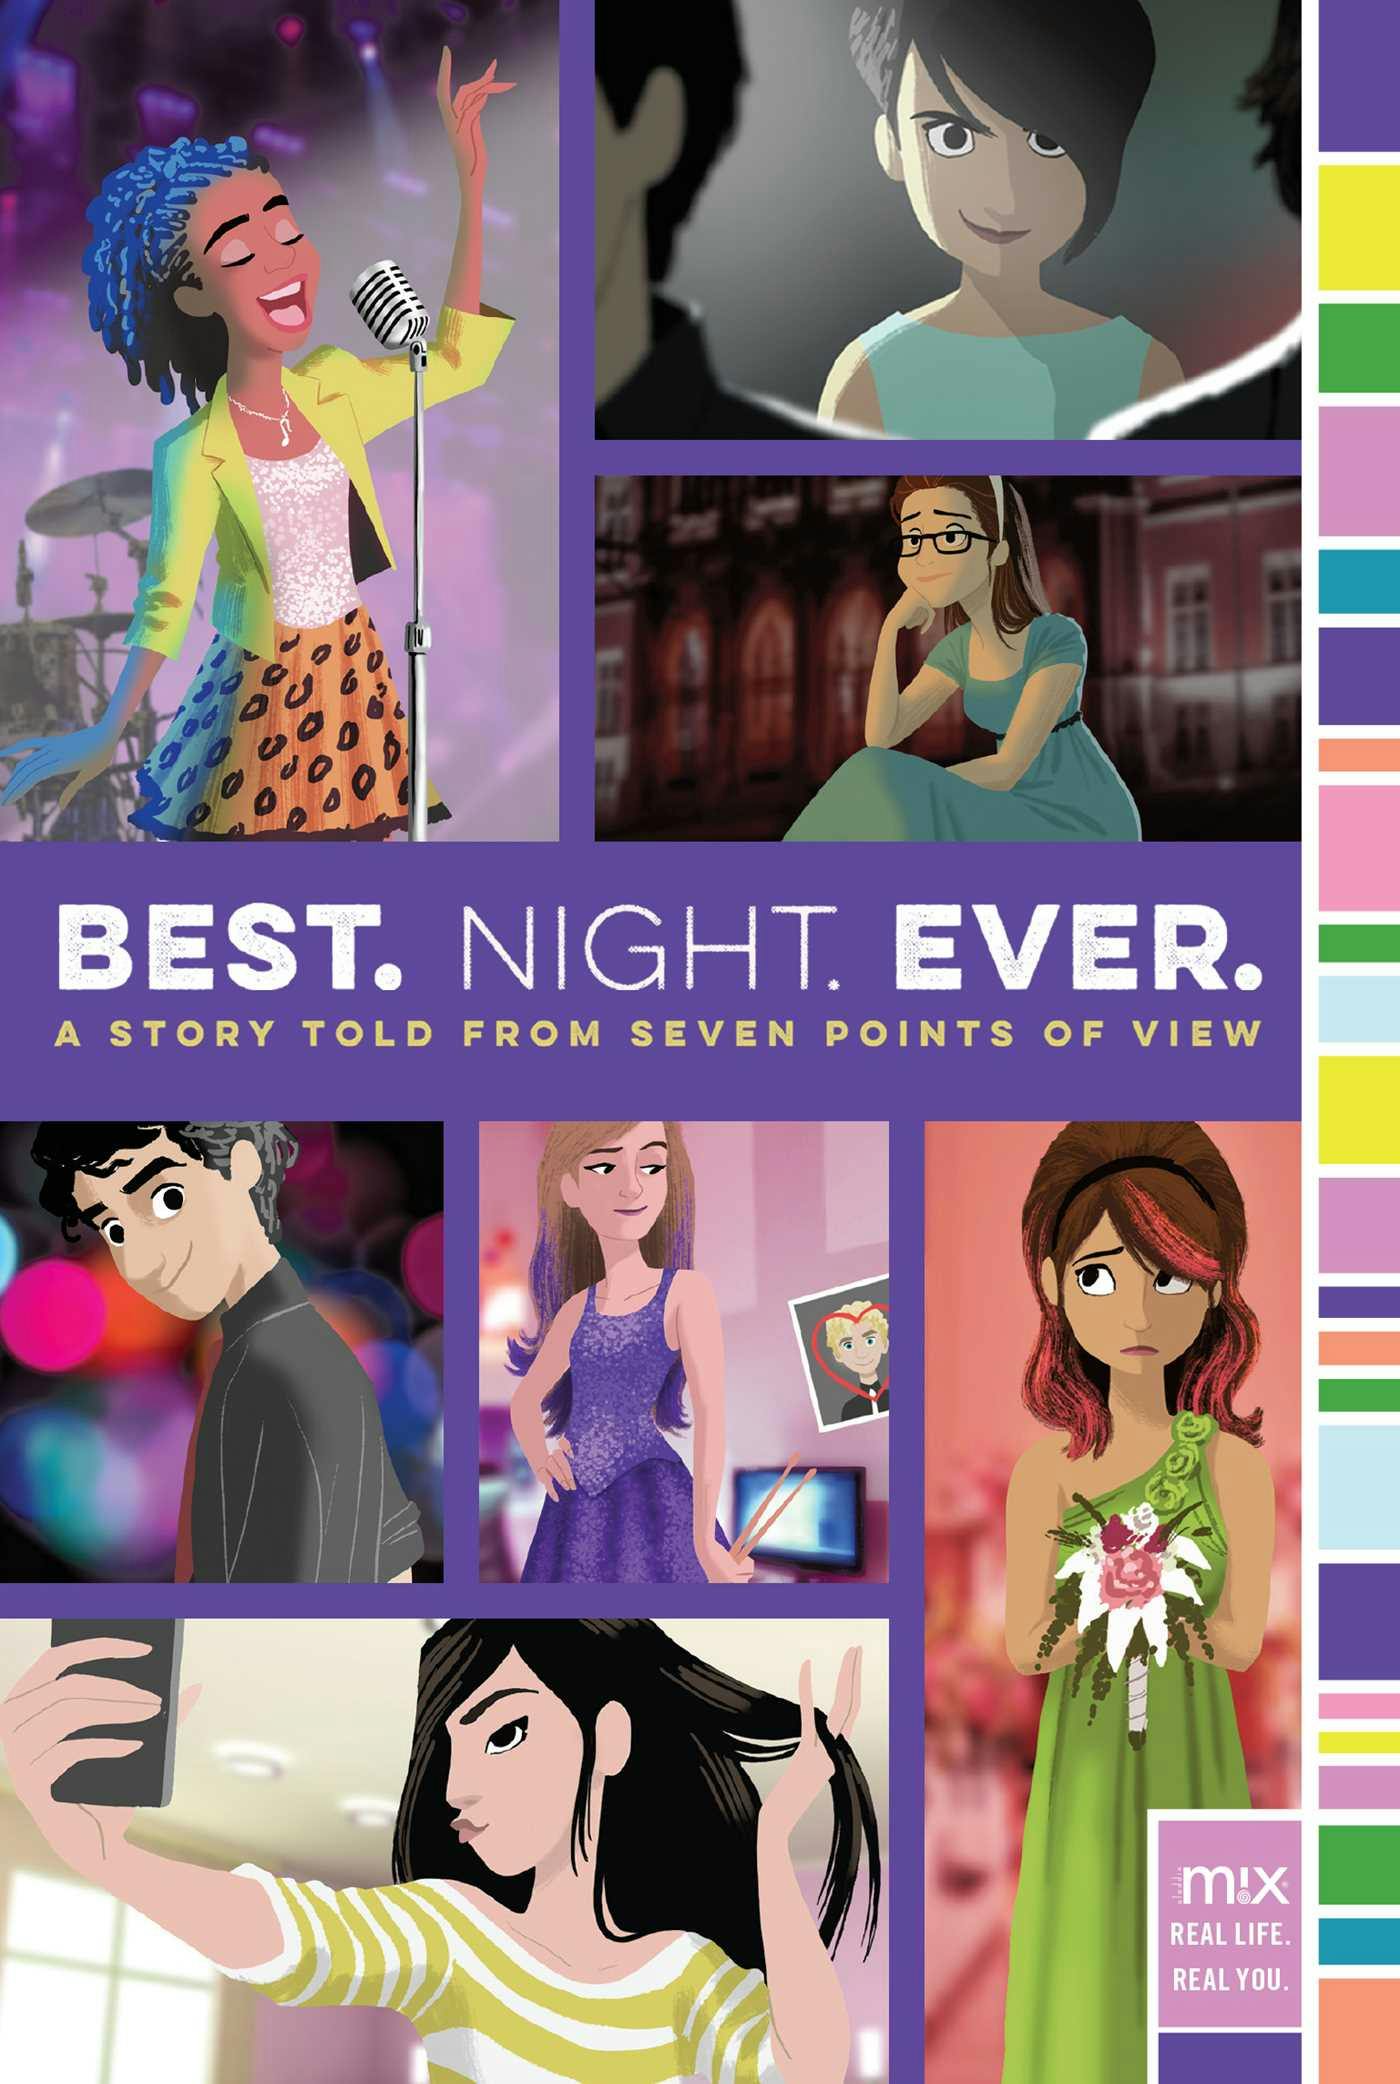 Best. Night. Ever.: A Story Told from Seven Points of View - undefined